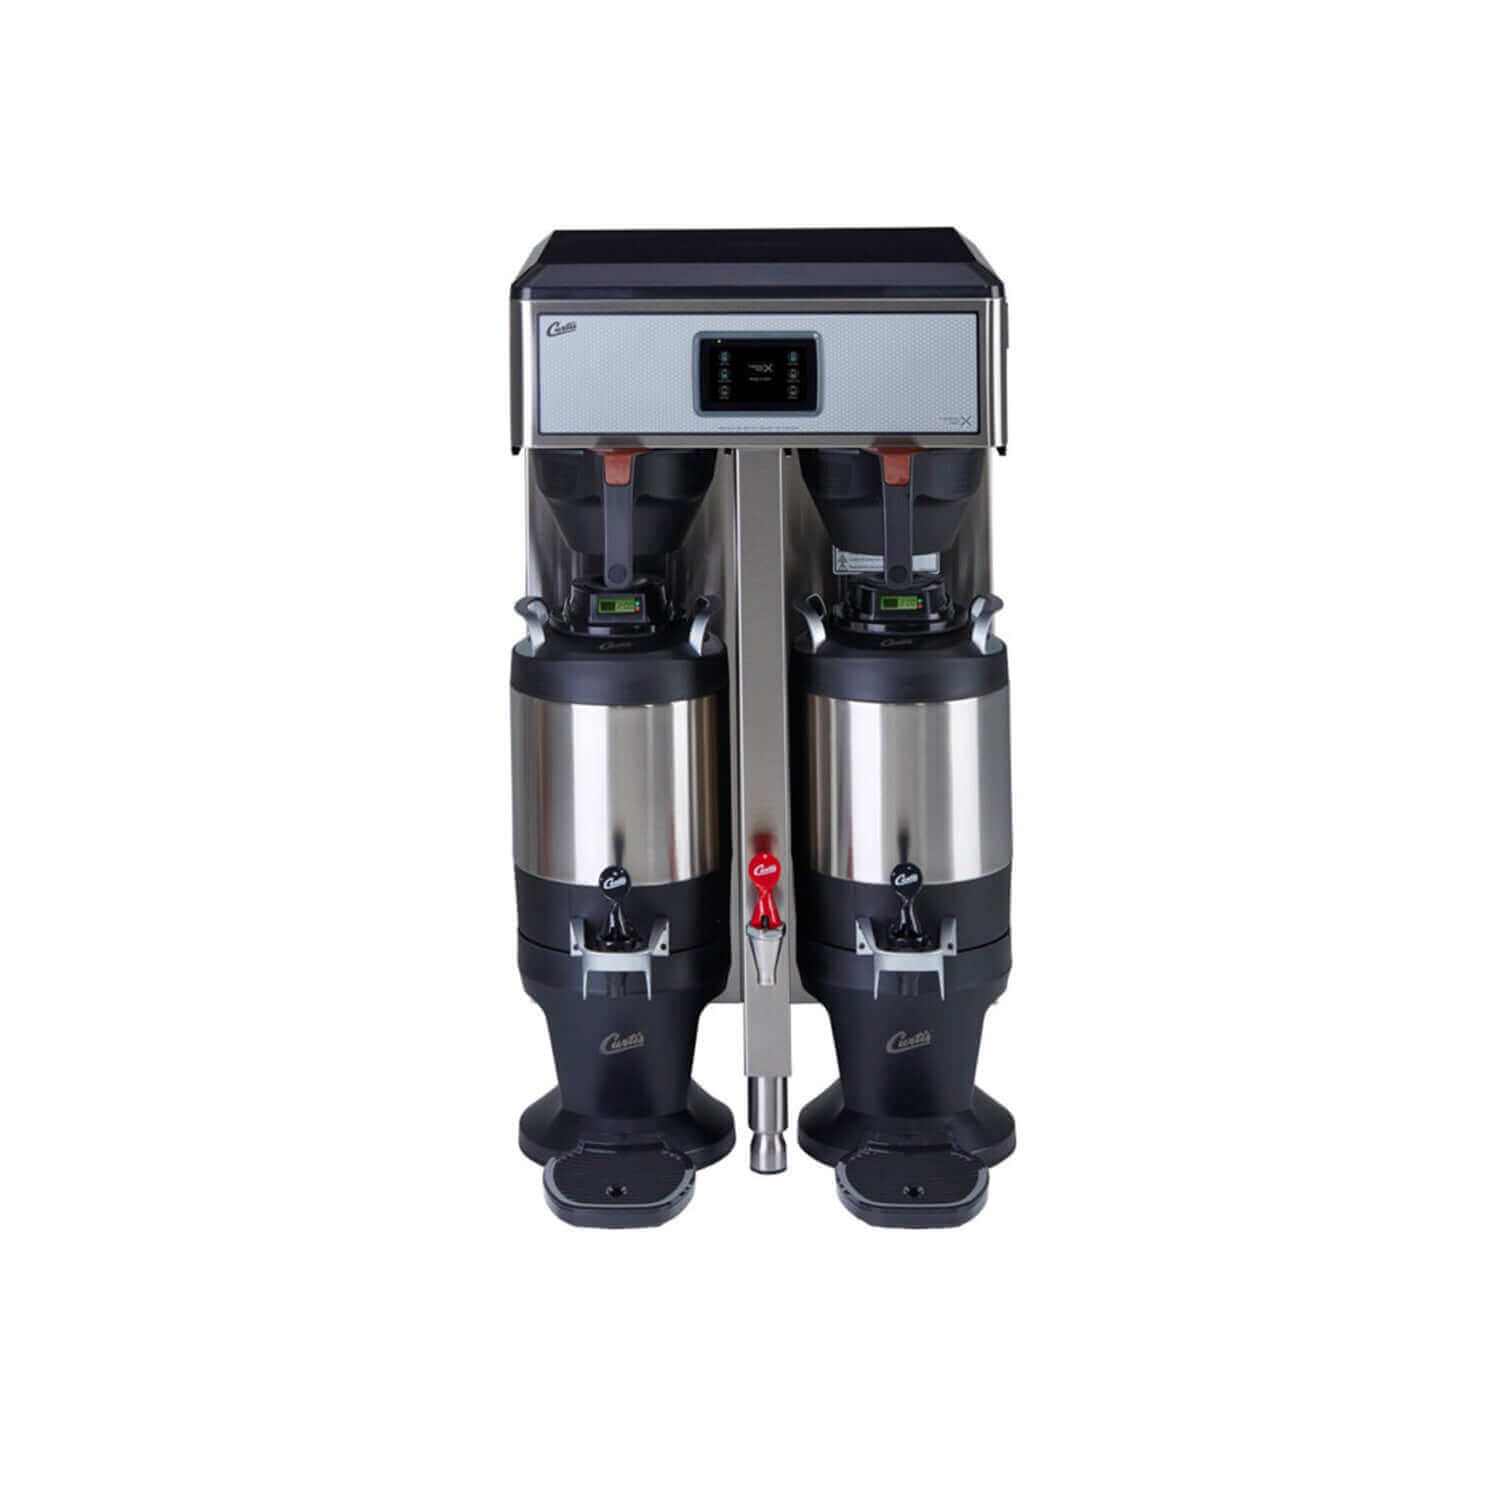 Curtis - Double coffee maker for 1, 1.5 gallons